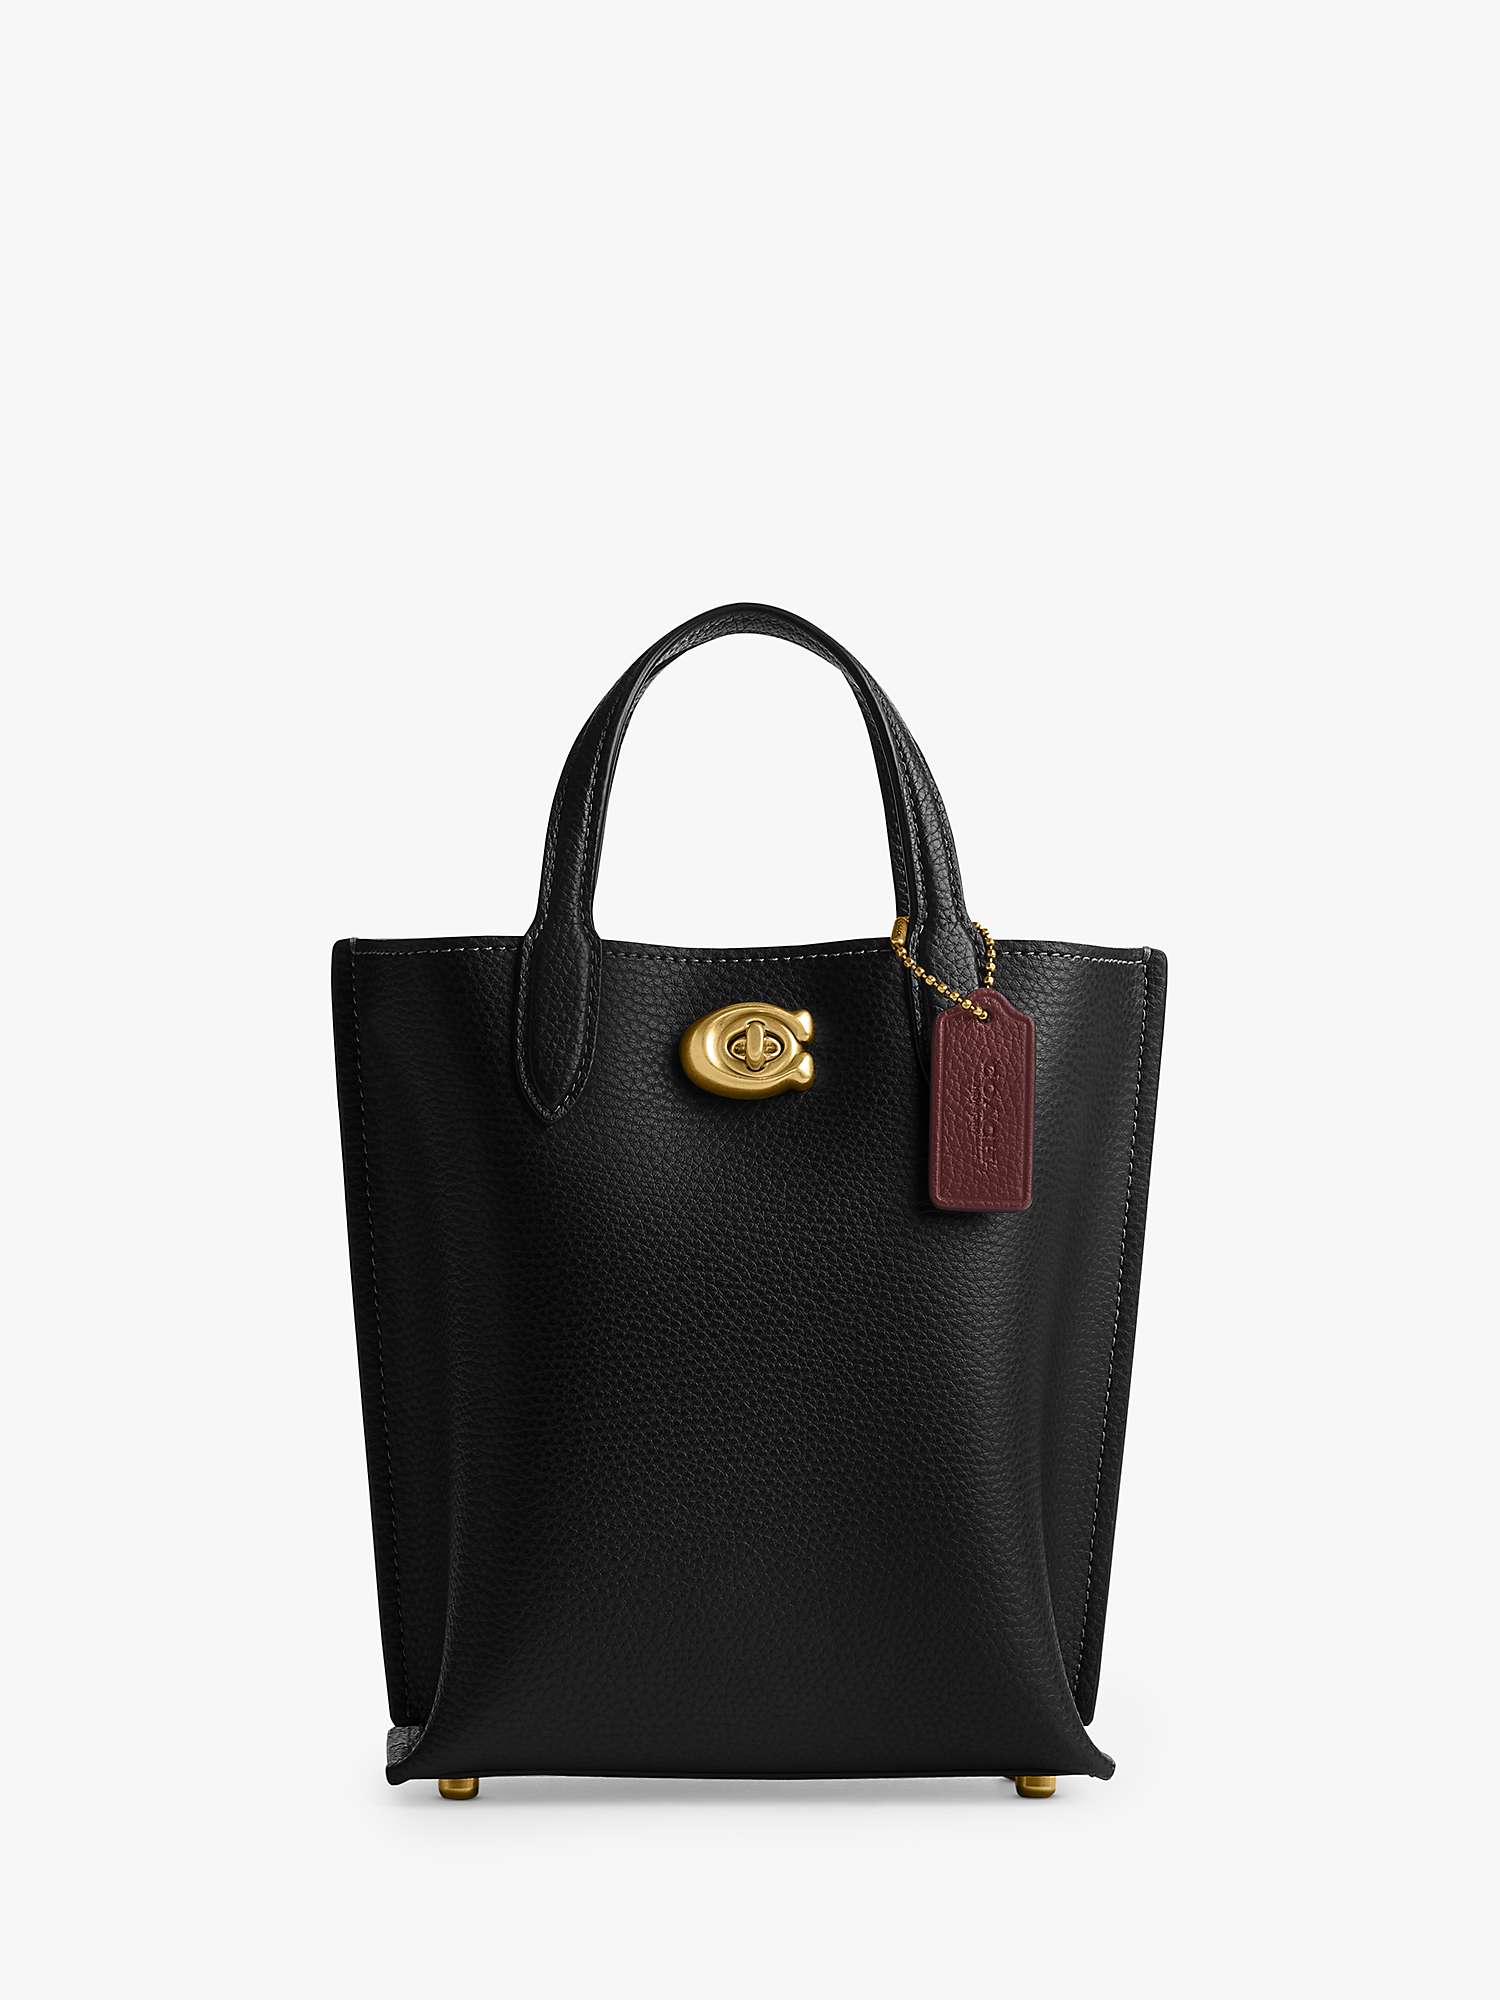 Buy Coach Willow 16 Leather Tote Bag Online at johnlewis.com